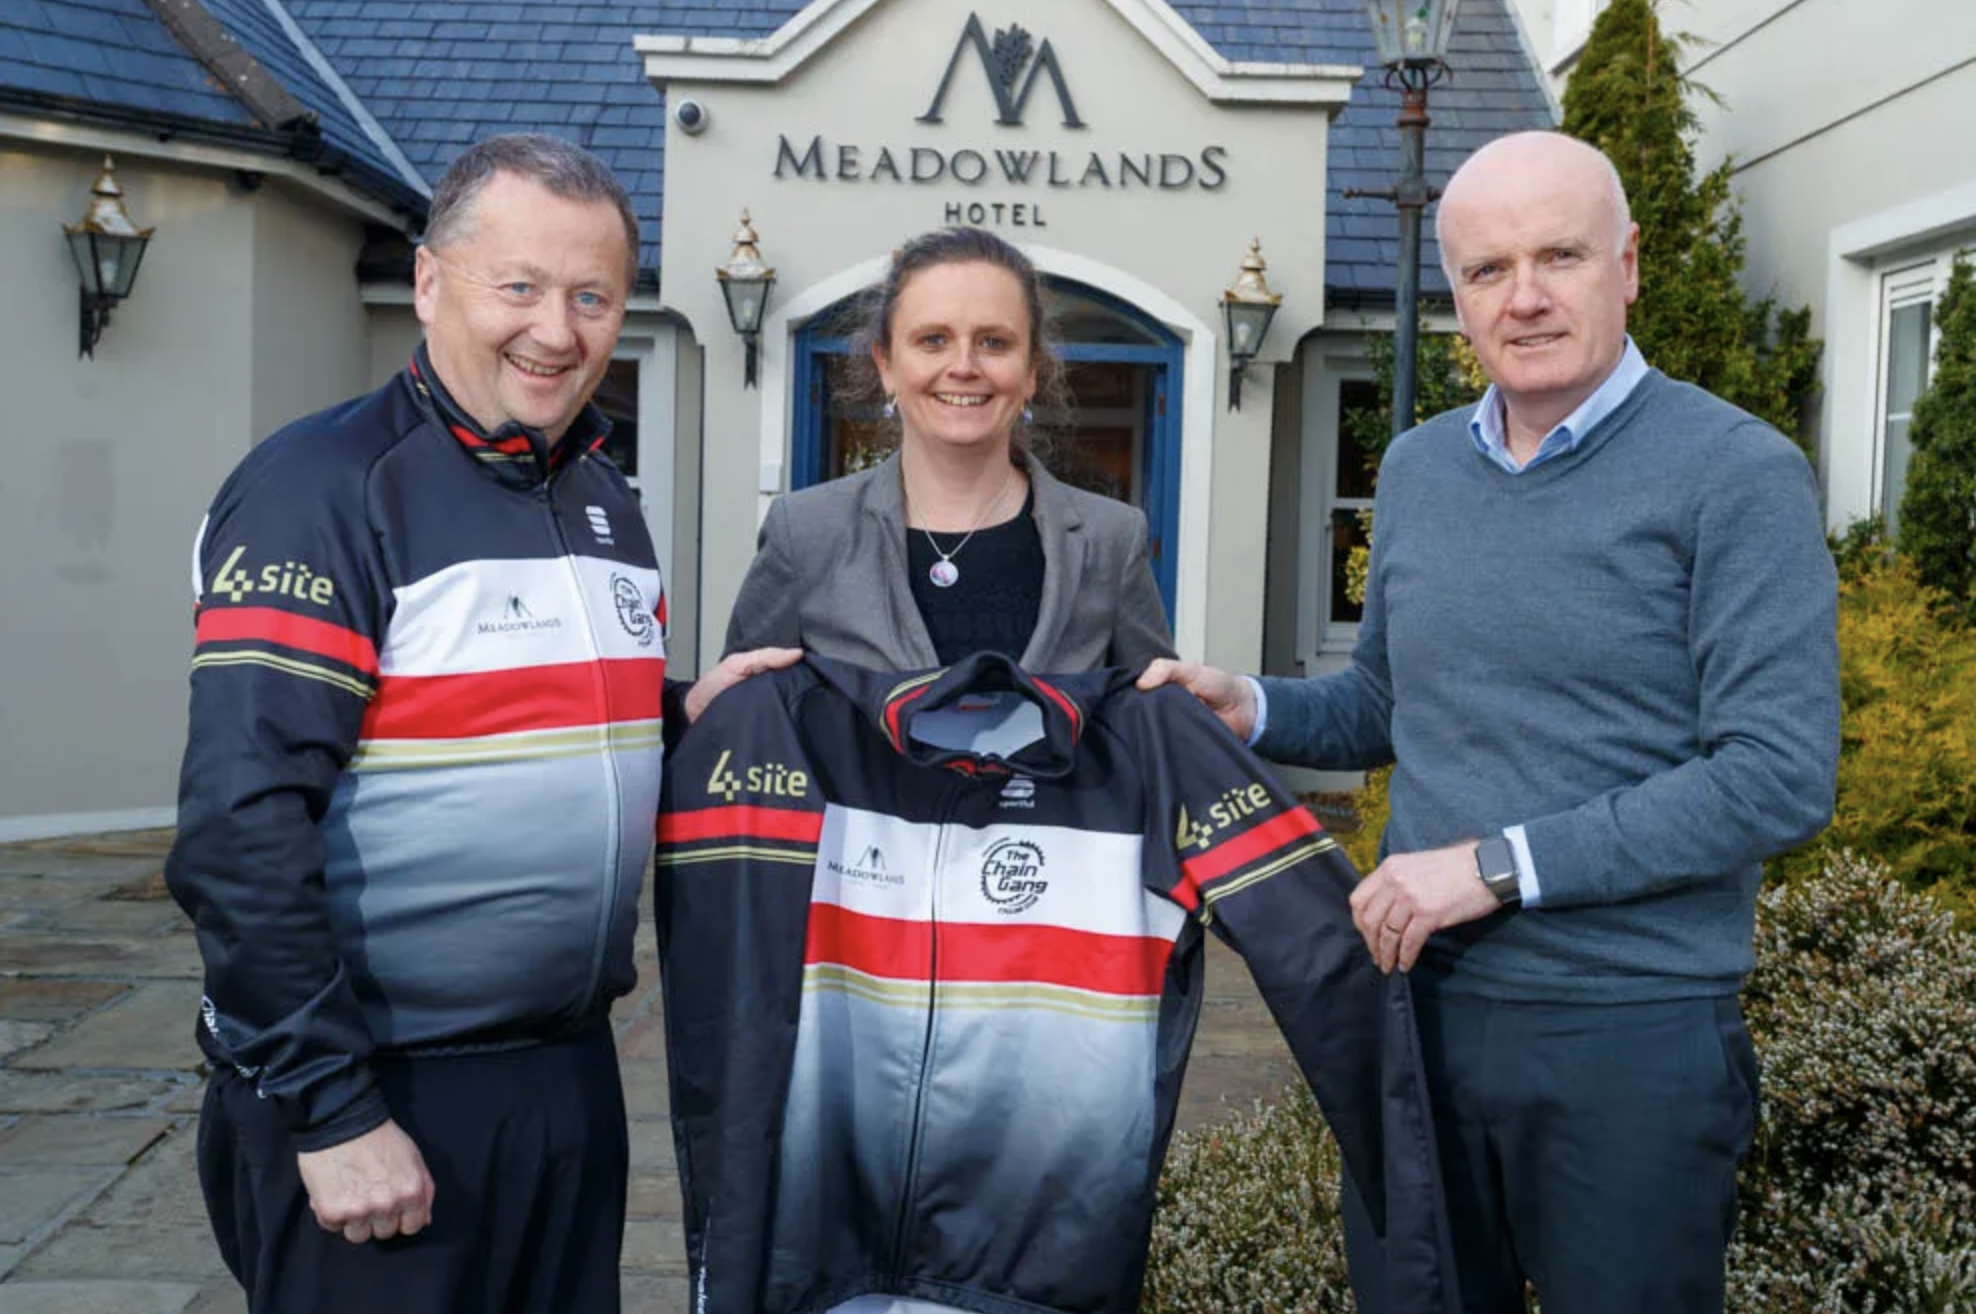 John Murray (Chairman of Chain Gang CC) Heather (Meadowlands) and Ian (4 Site) our kit sponsors.